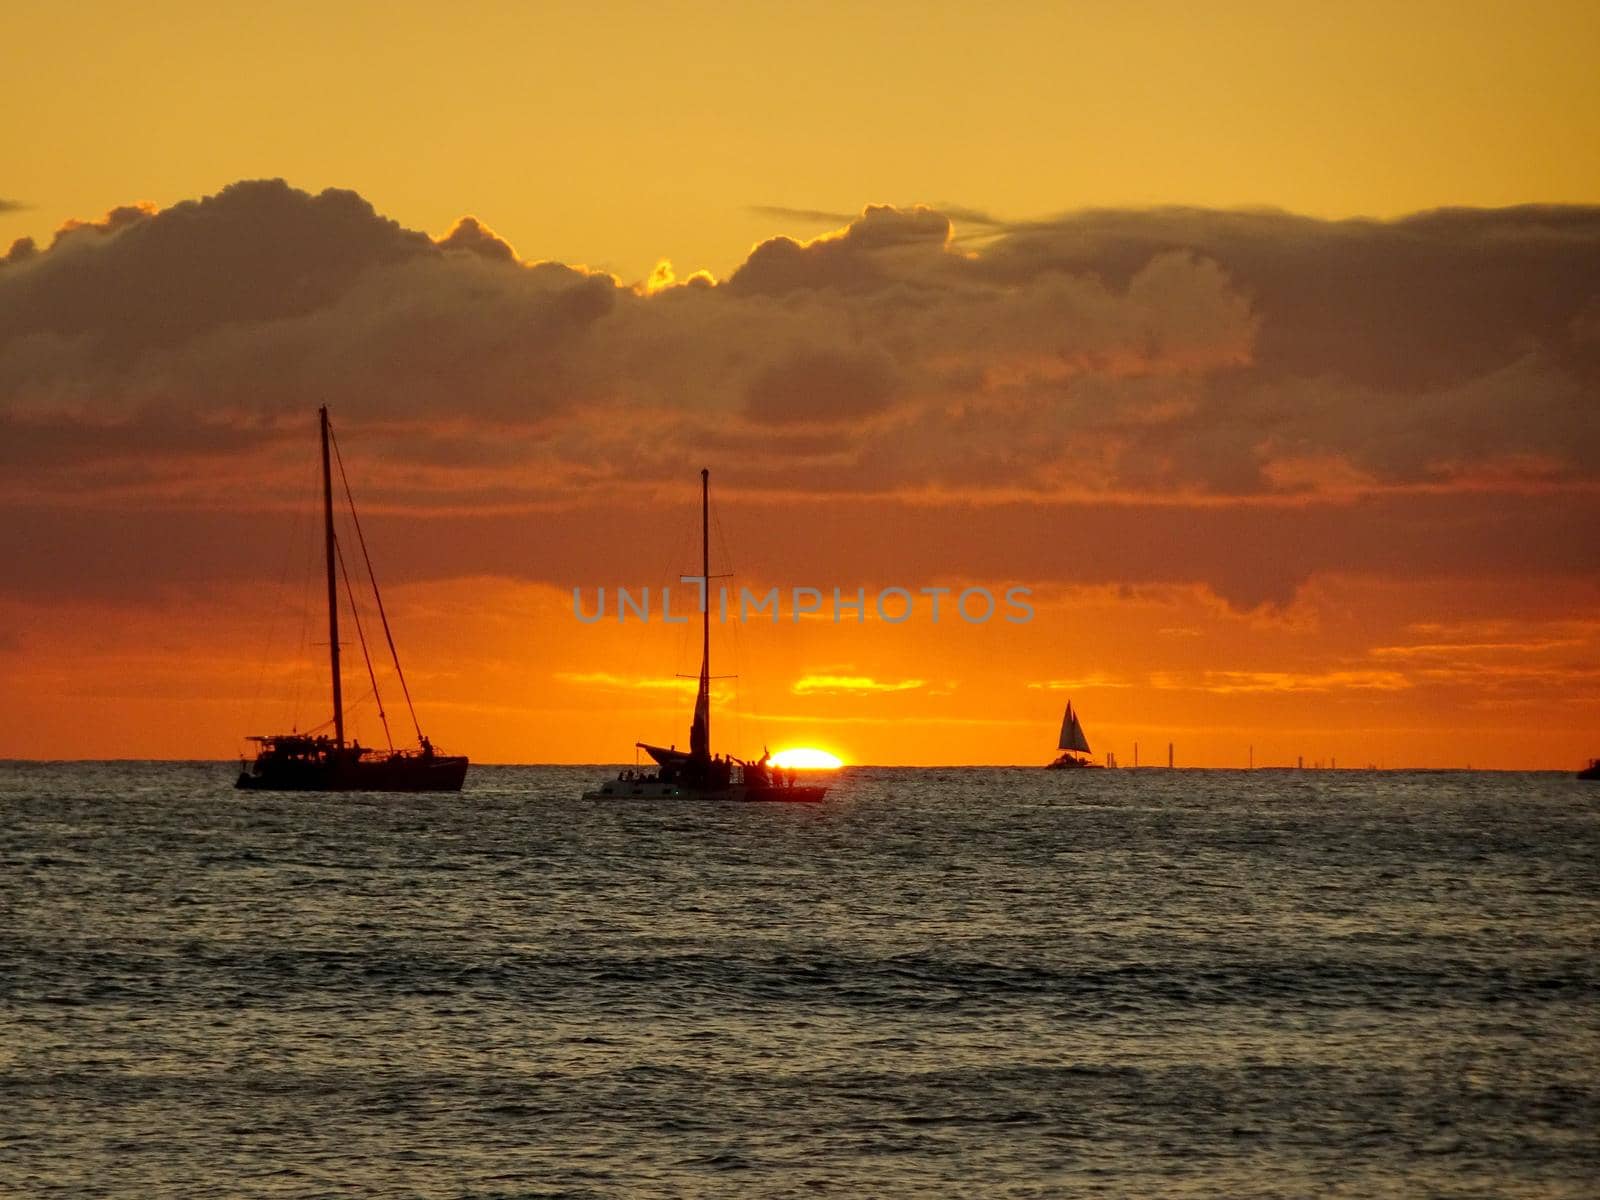 Boats on the pacific ocean waters of Waikiki at Sunset by EricGBVD